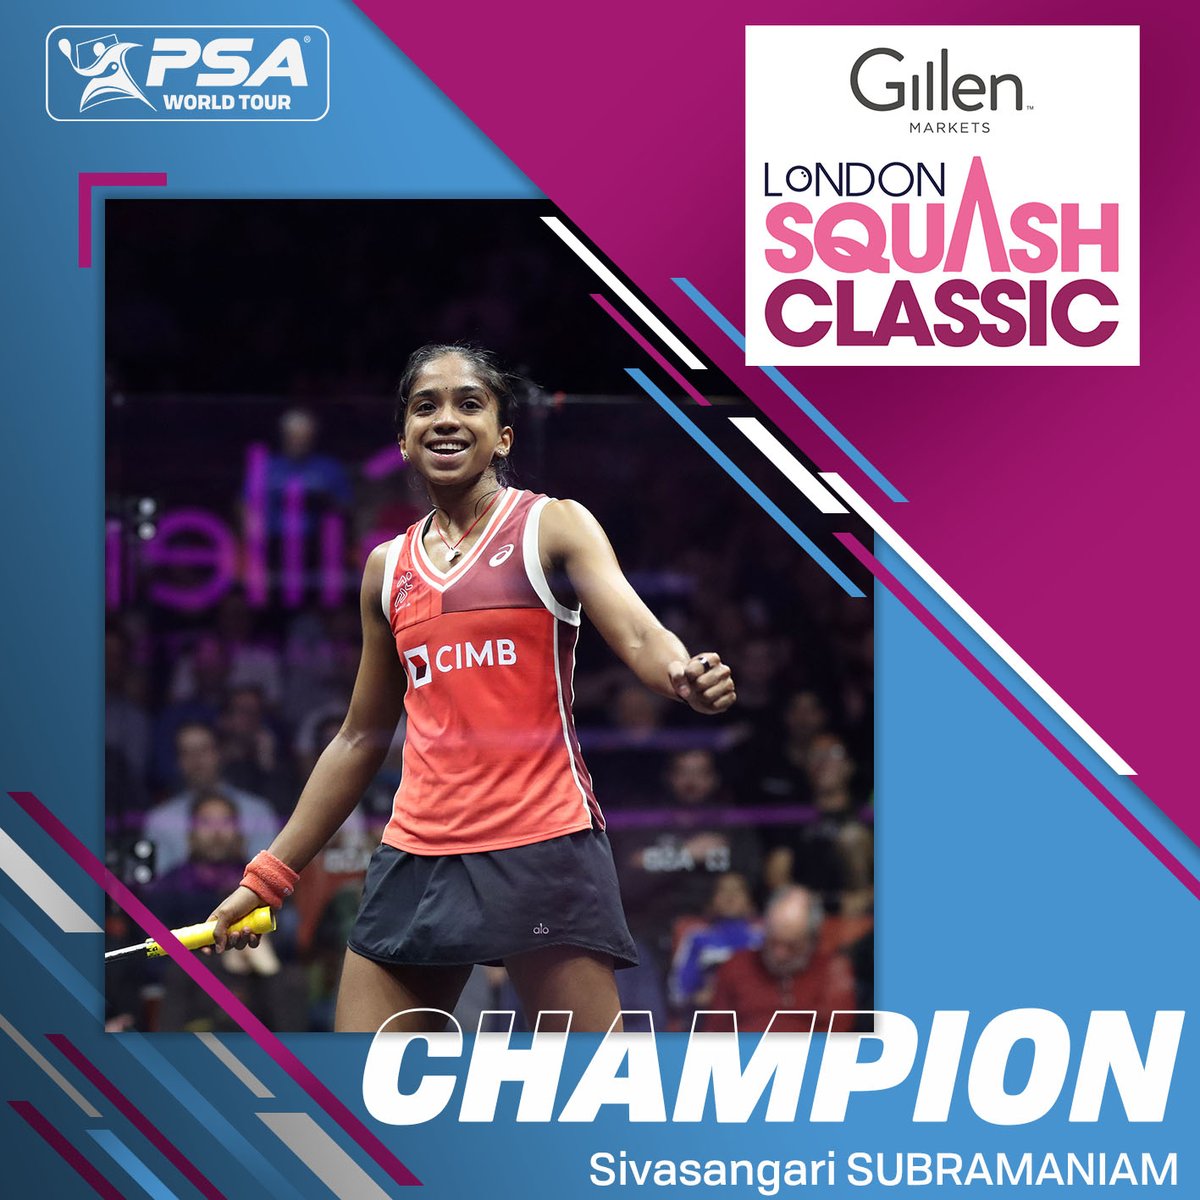 A first Gold event title for @sangari_99 🏆 She's beaten the World No.1, World No.4 and World No.2 to lift the trophy 🔥 🇲🇾 [7] @sangari_99 beats [2] @HaniaaElHammamy 🇪🇬 3-2: 11-9, 5-11, 13-11, 12-14, 11-8 (81m) 📝 Report here: bitly.ws/3hcB5 #LondonClassic